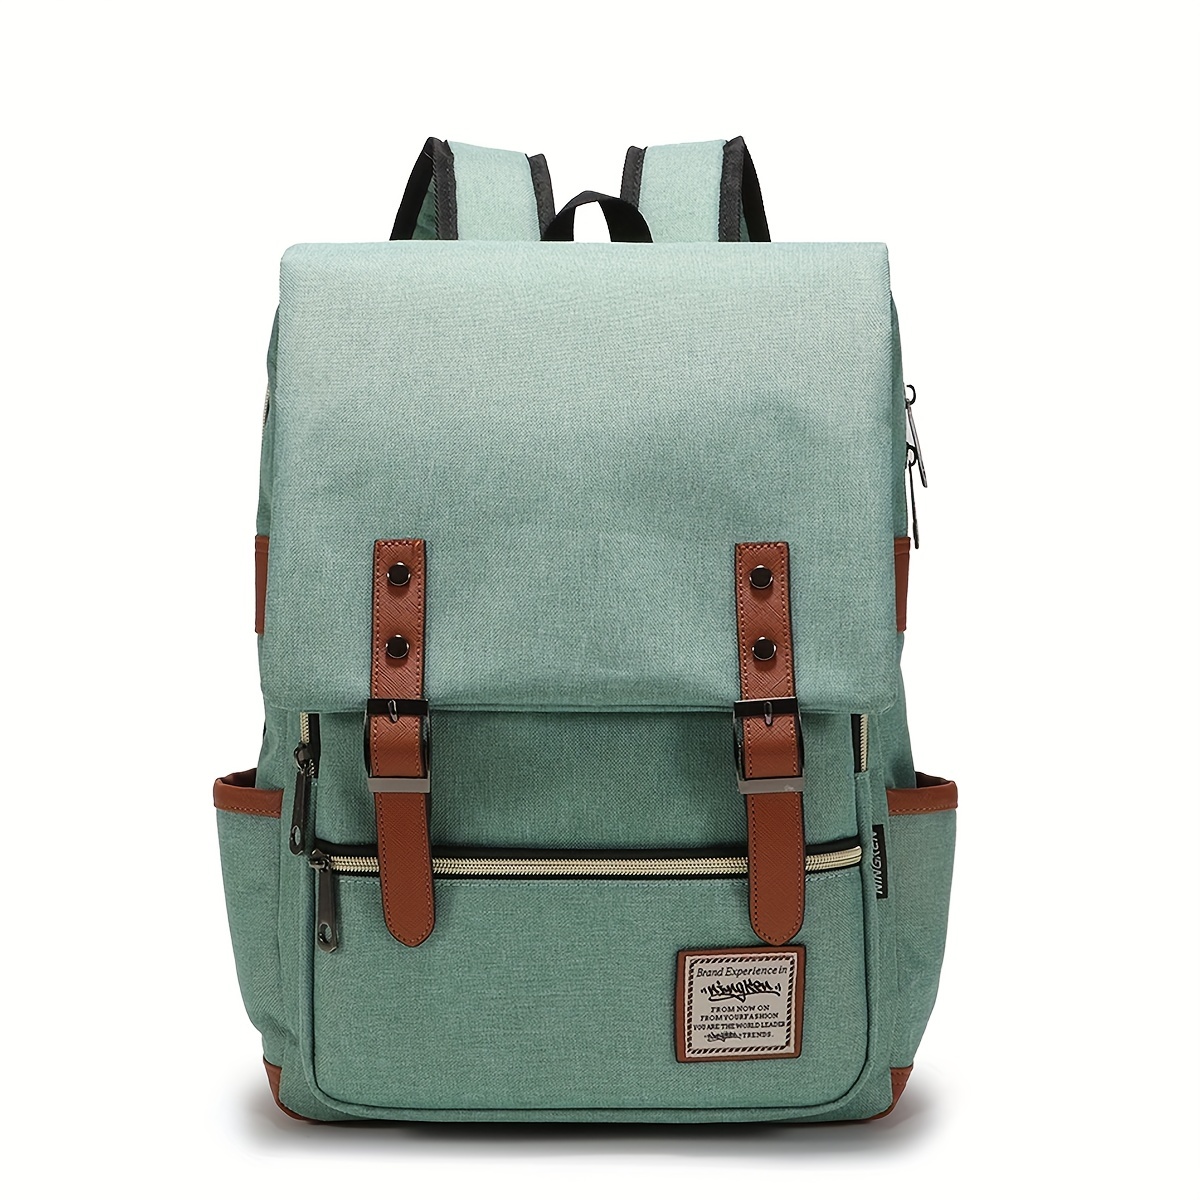 Canvas Backpack Casual Canvas Travel Backpack Men's School